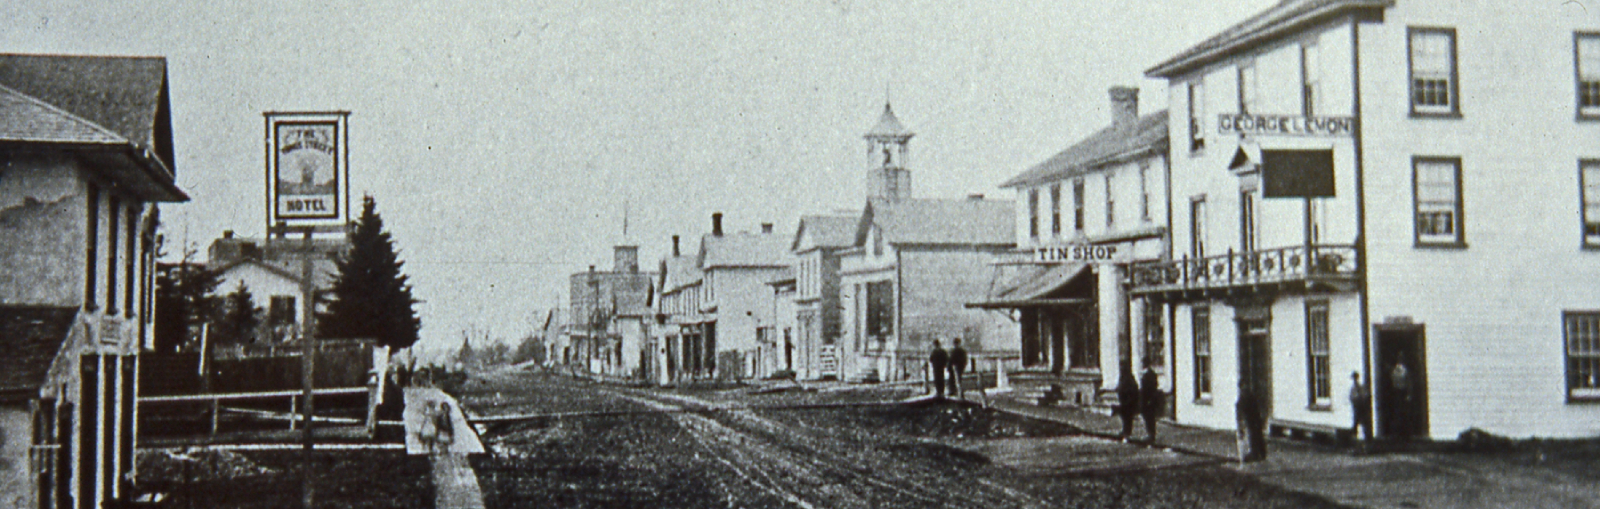 Black and white photo of Yonge Street in Aurora in the 1870s.